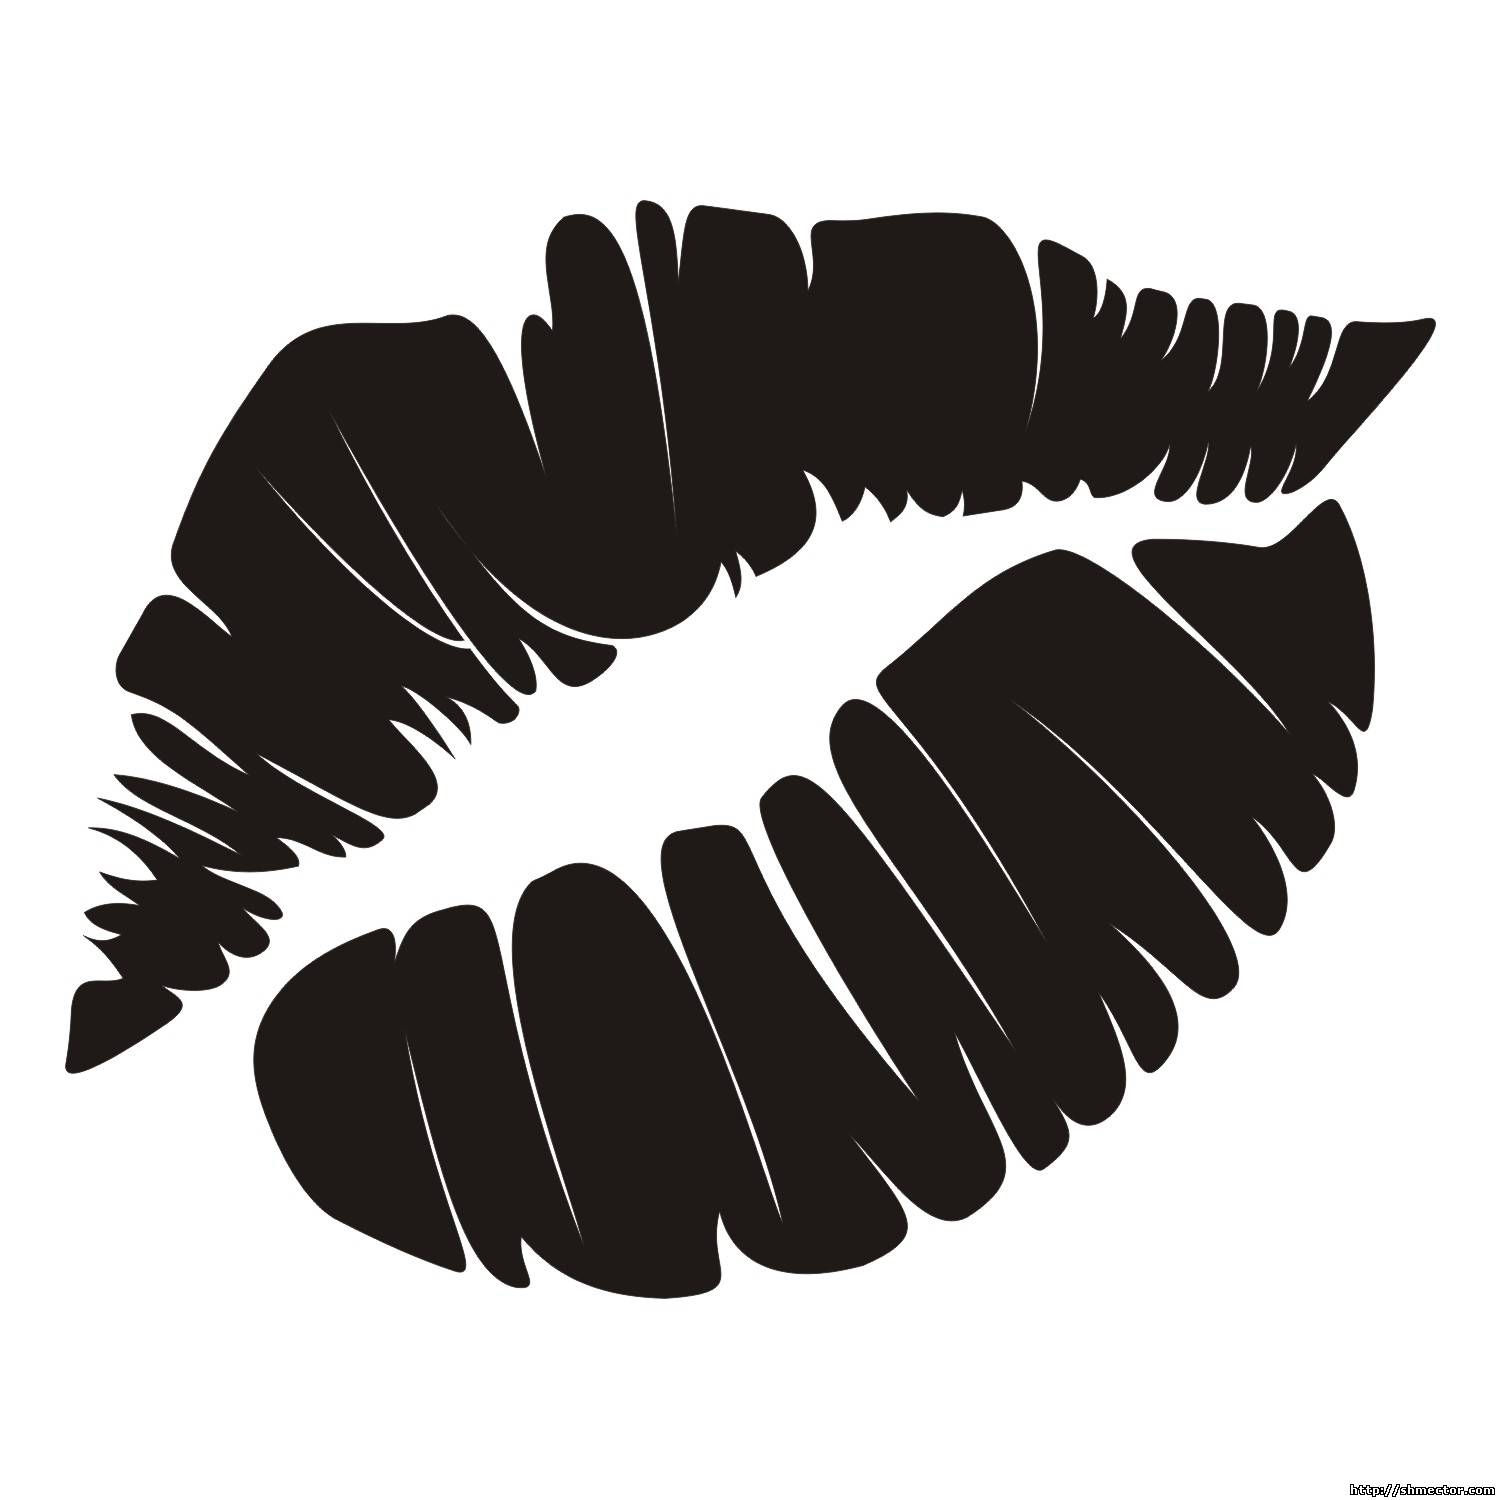 Download Vector for free use: Lips mark